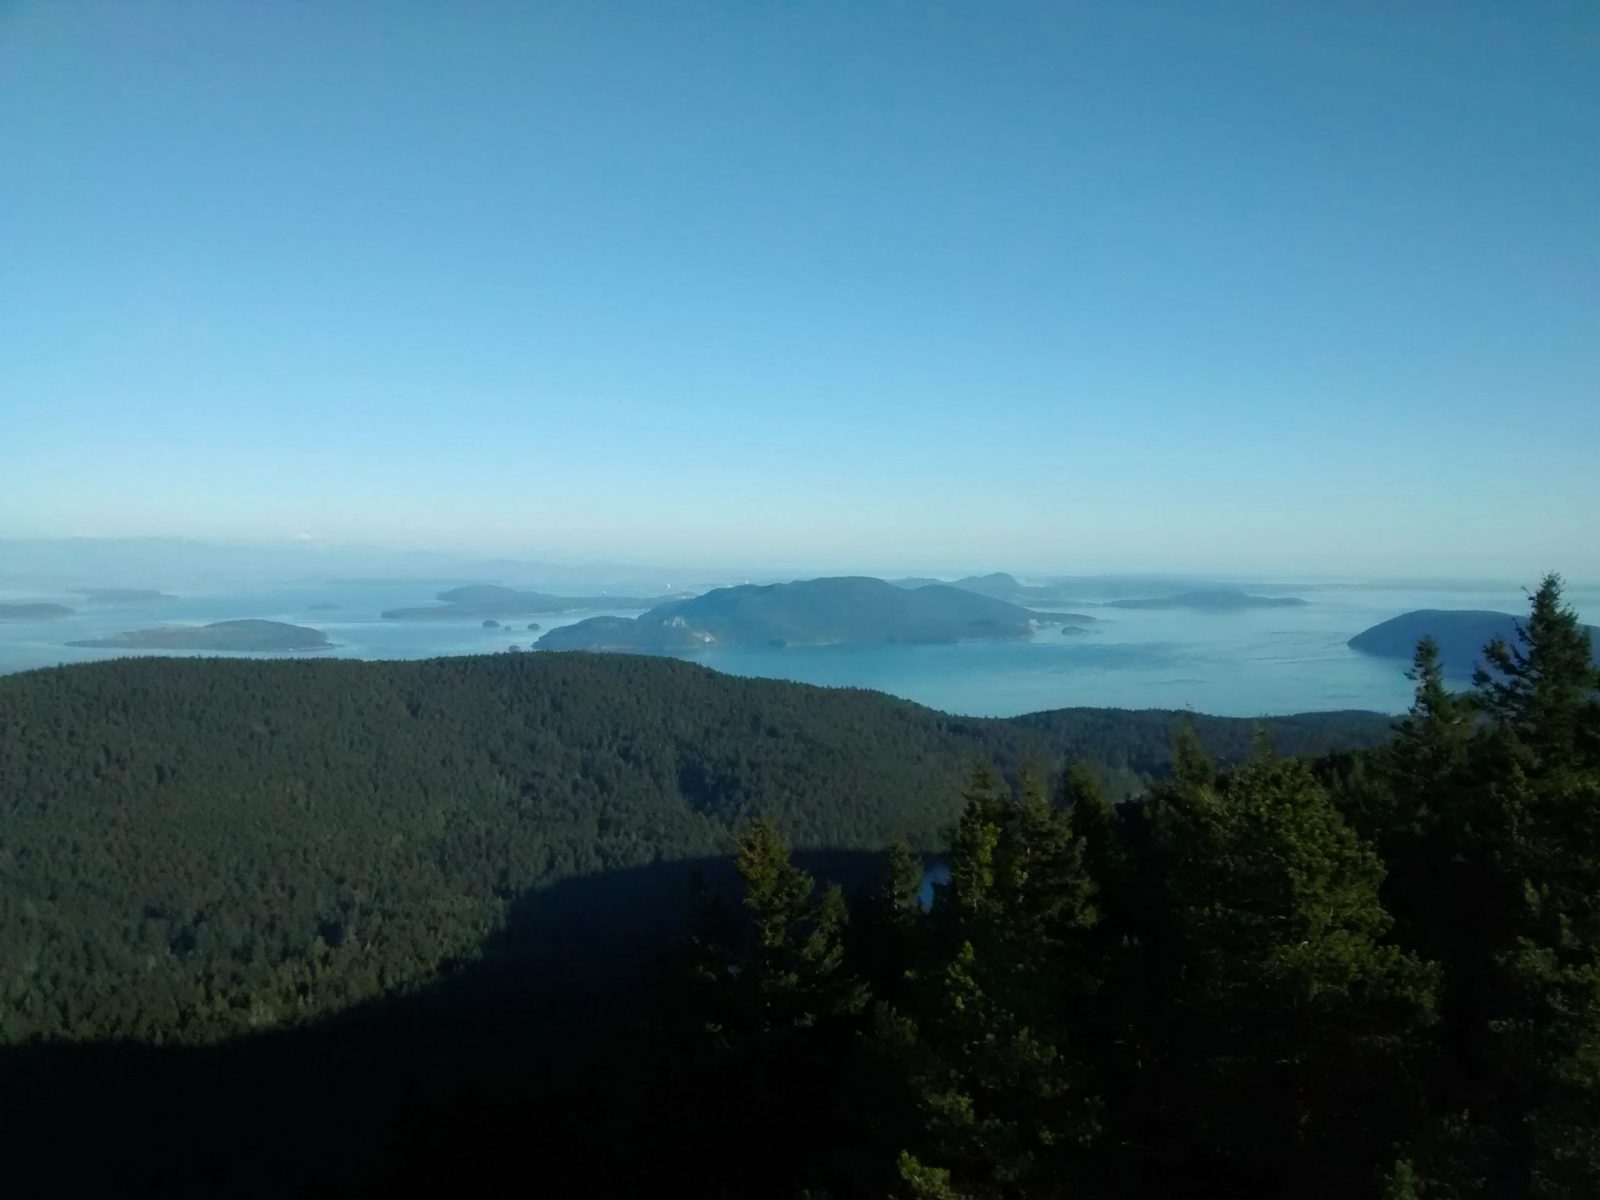 View from a high place above the forest. There are near and distant forested islands in a blue sea on a sunny, clear day